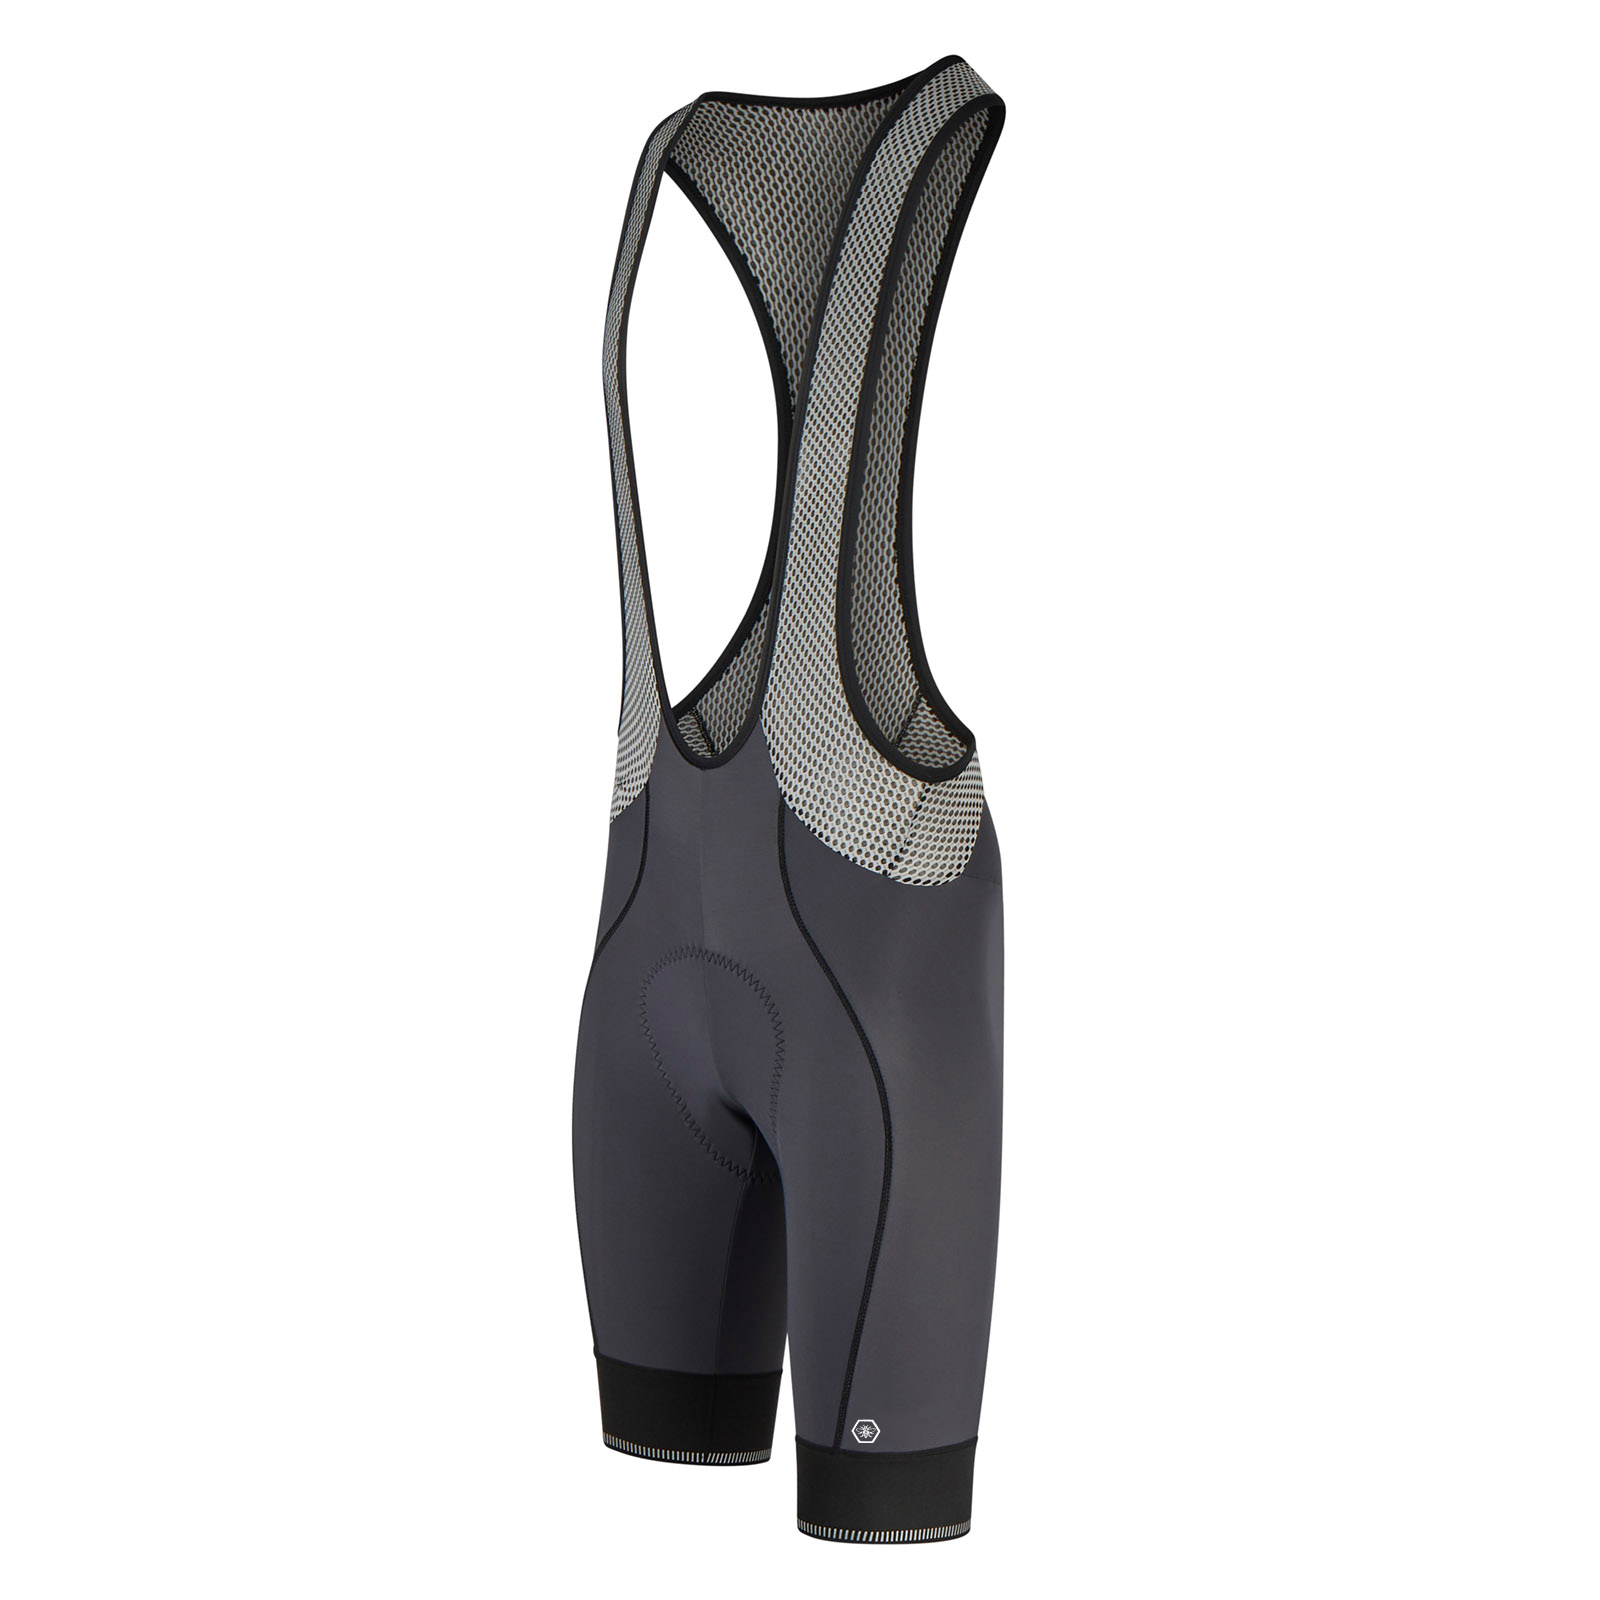 Perform Carbon Bib Shorts - Lusso Cycle Wear